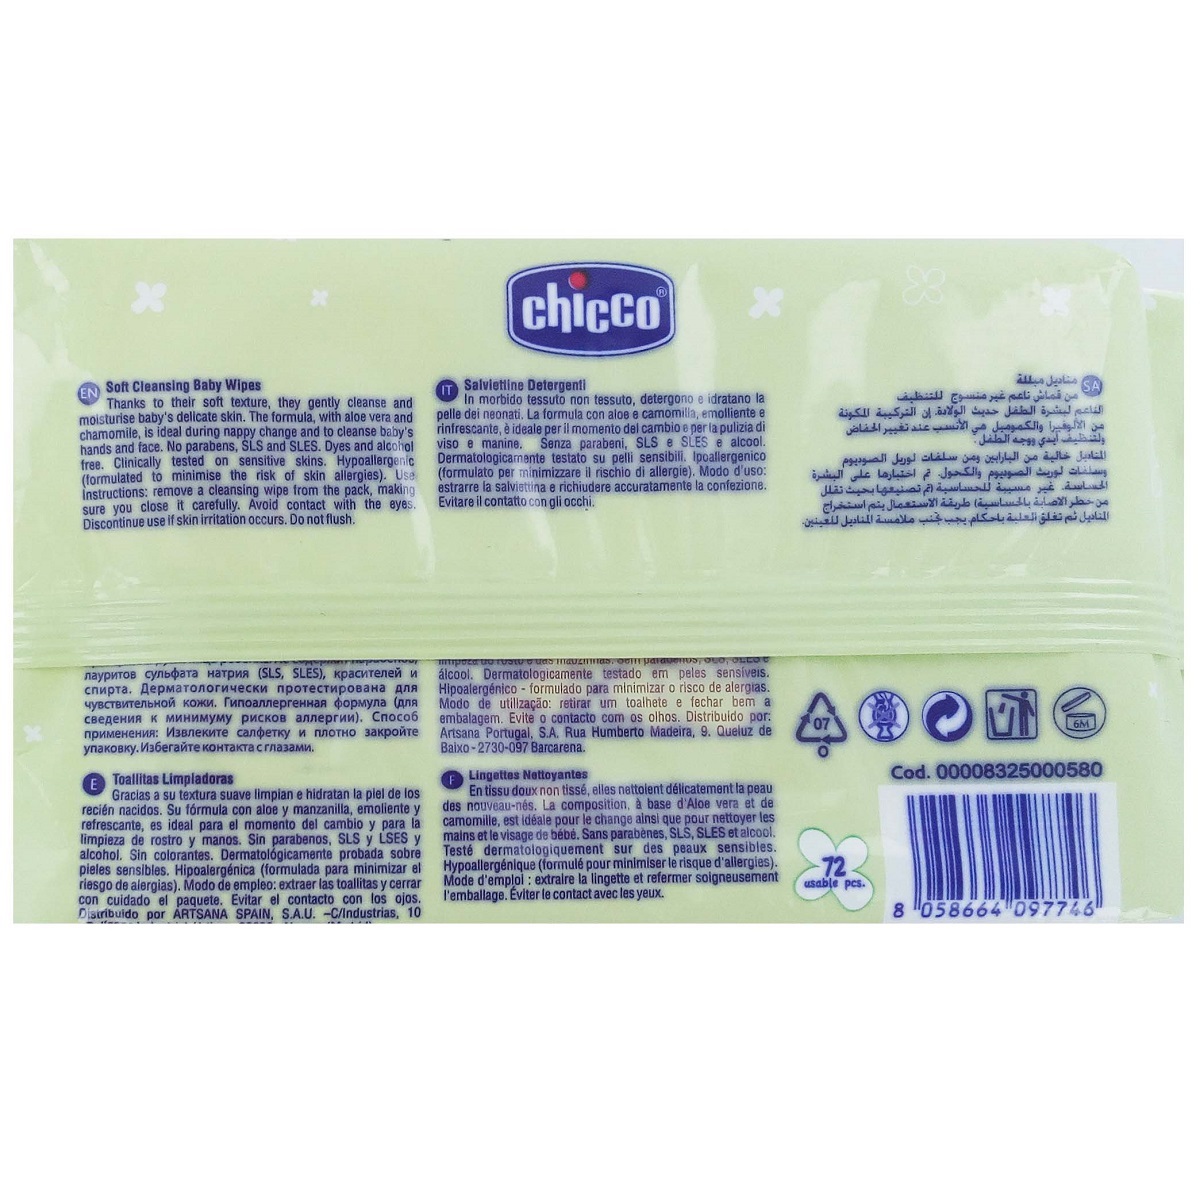 Chicco Baby Soft Cleansing Wipes No Flip over 72's